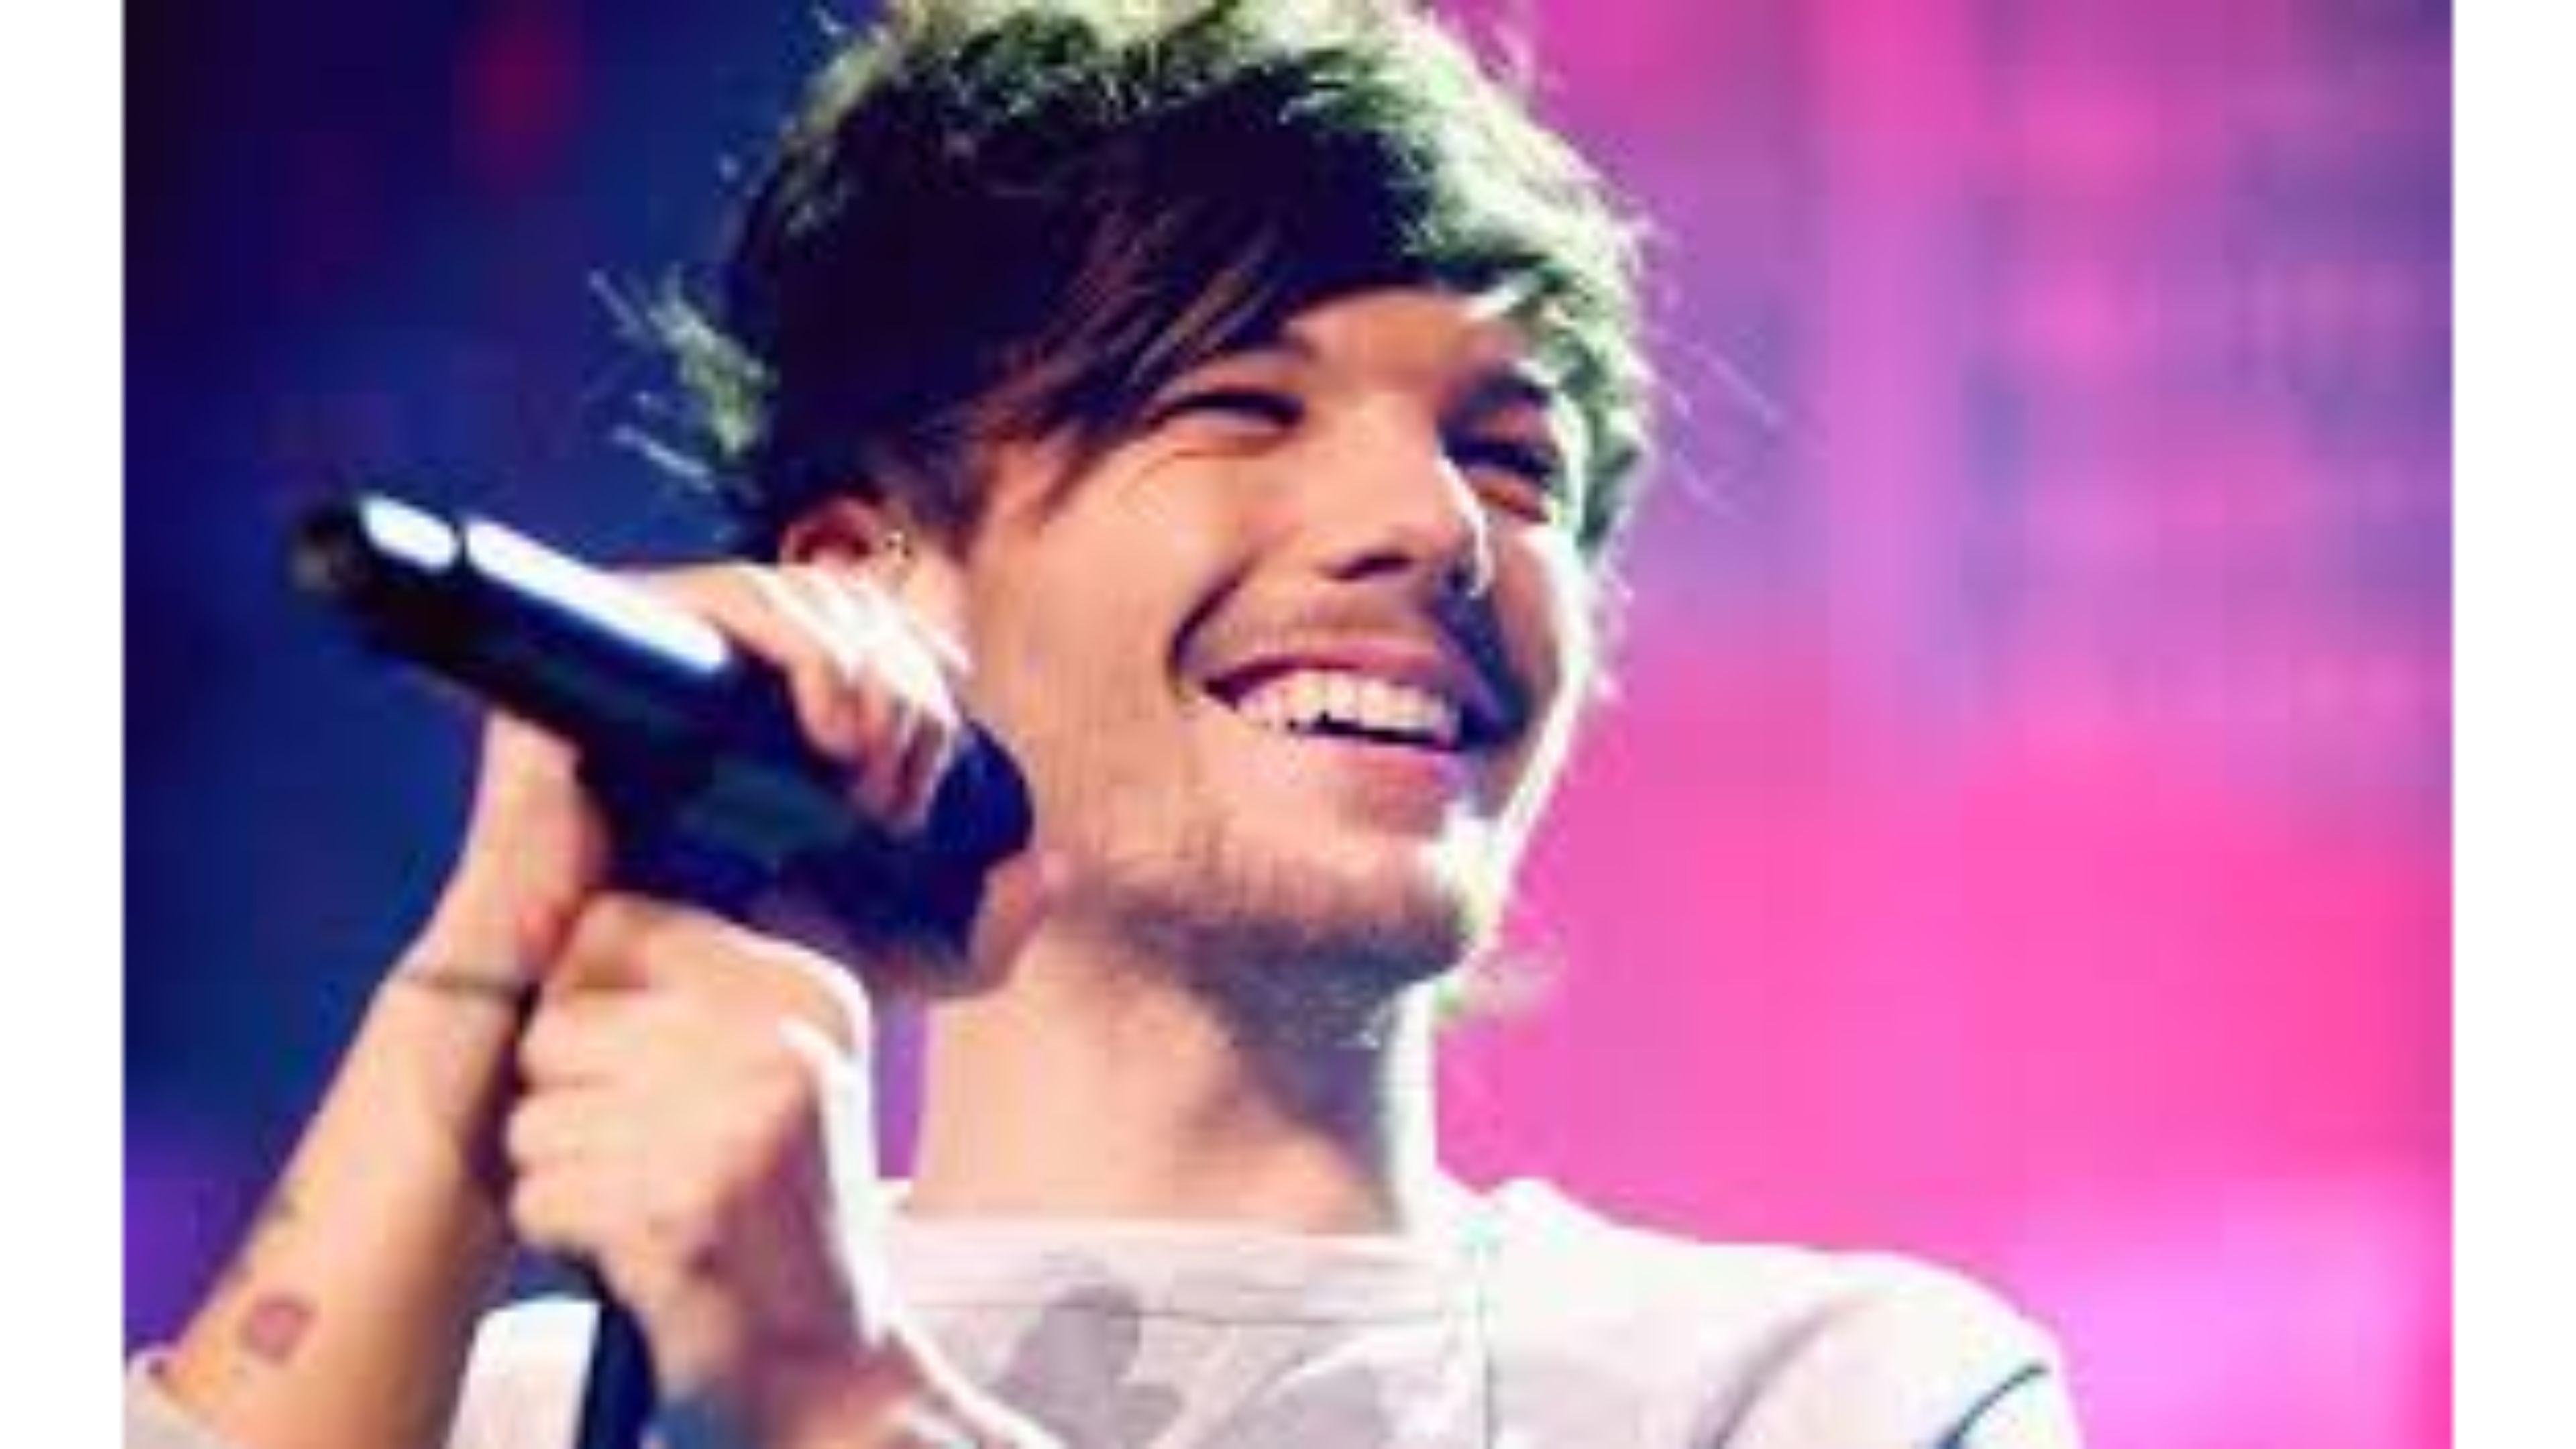 louis tomlinson wallpapers wallpaper cave on louis tomlinson wallpapers